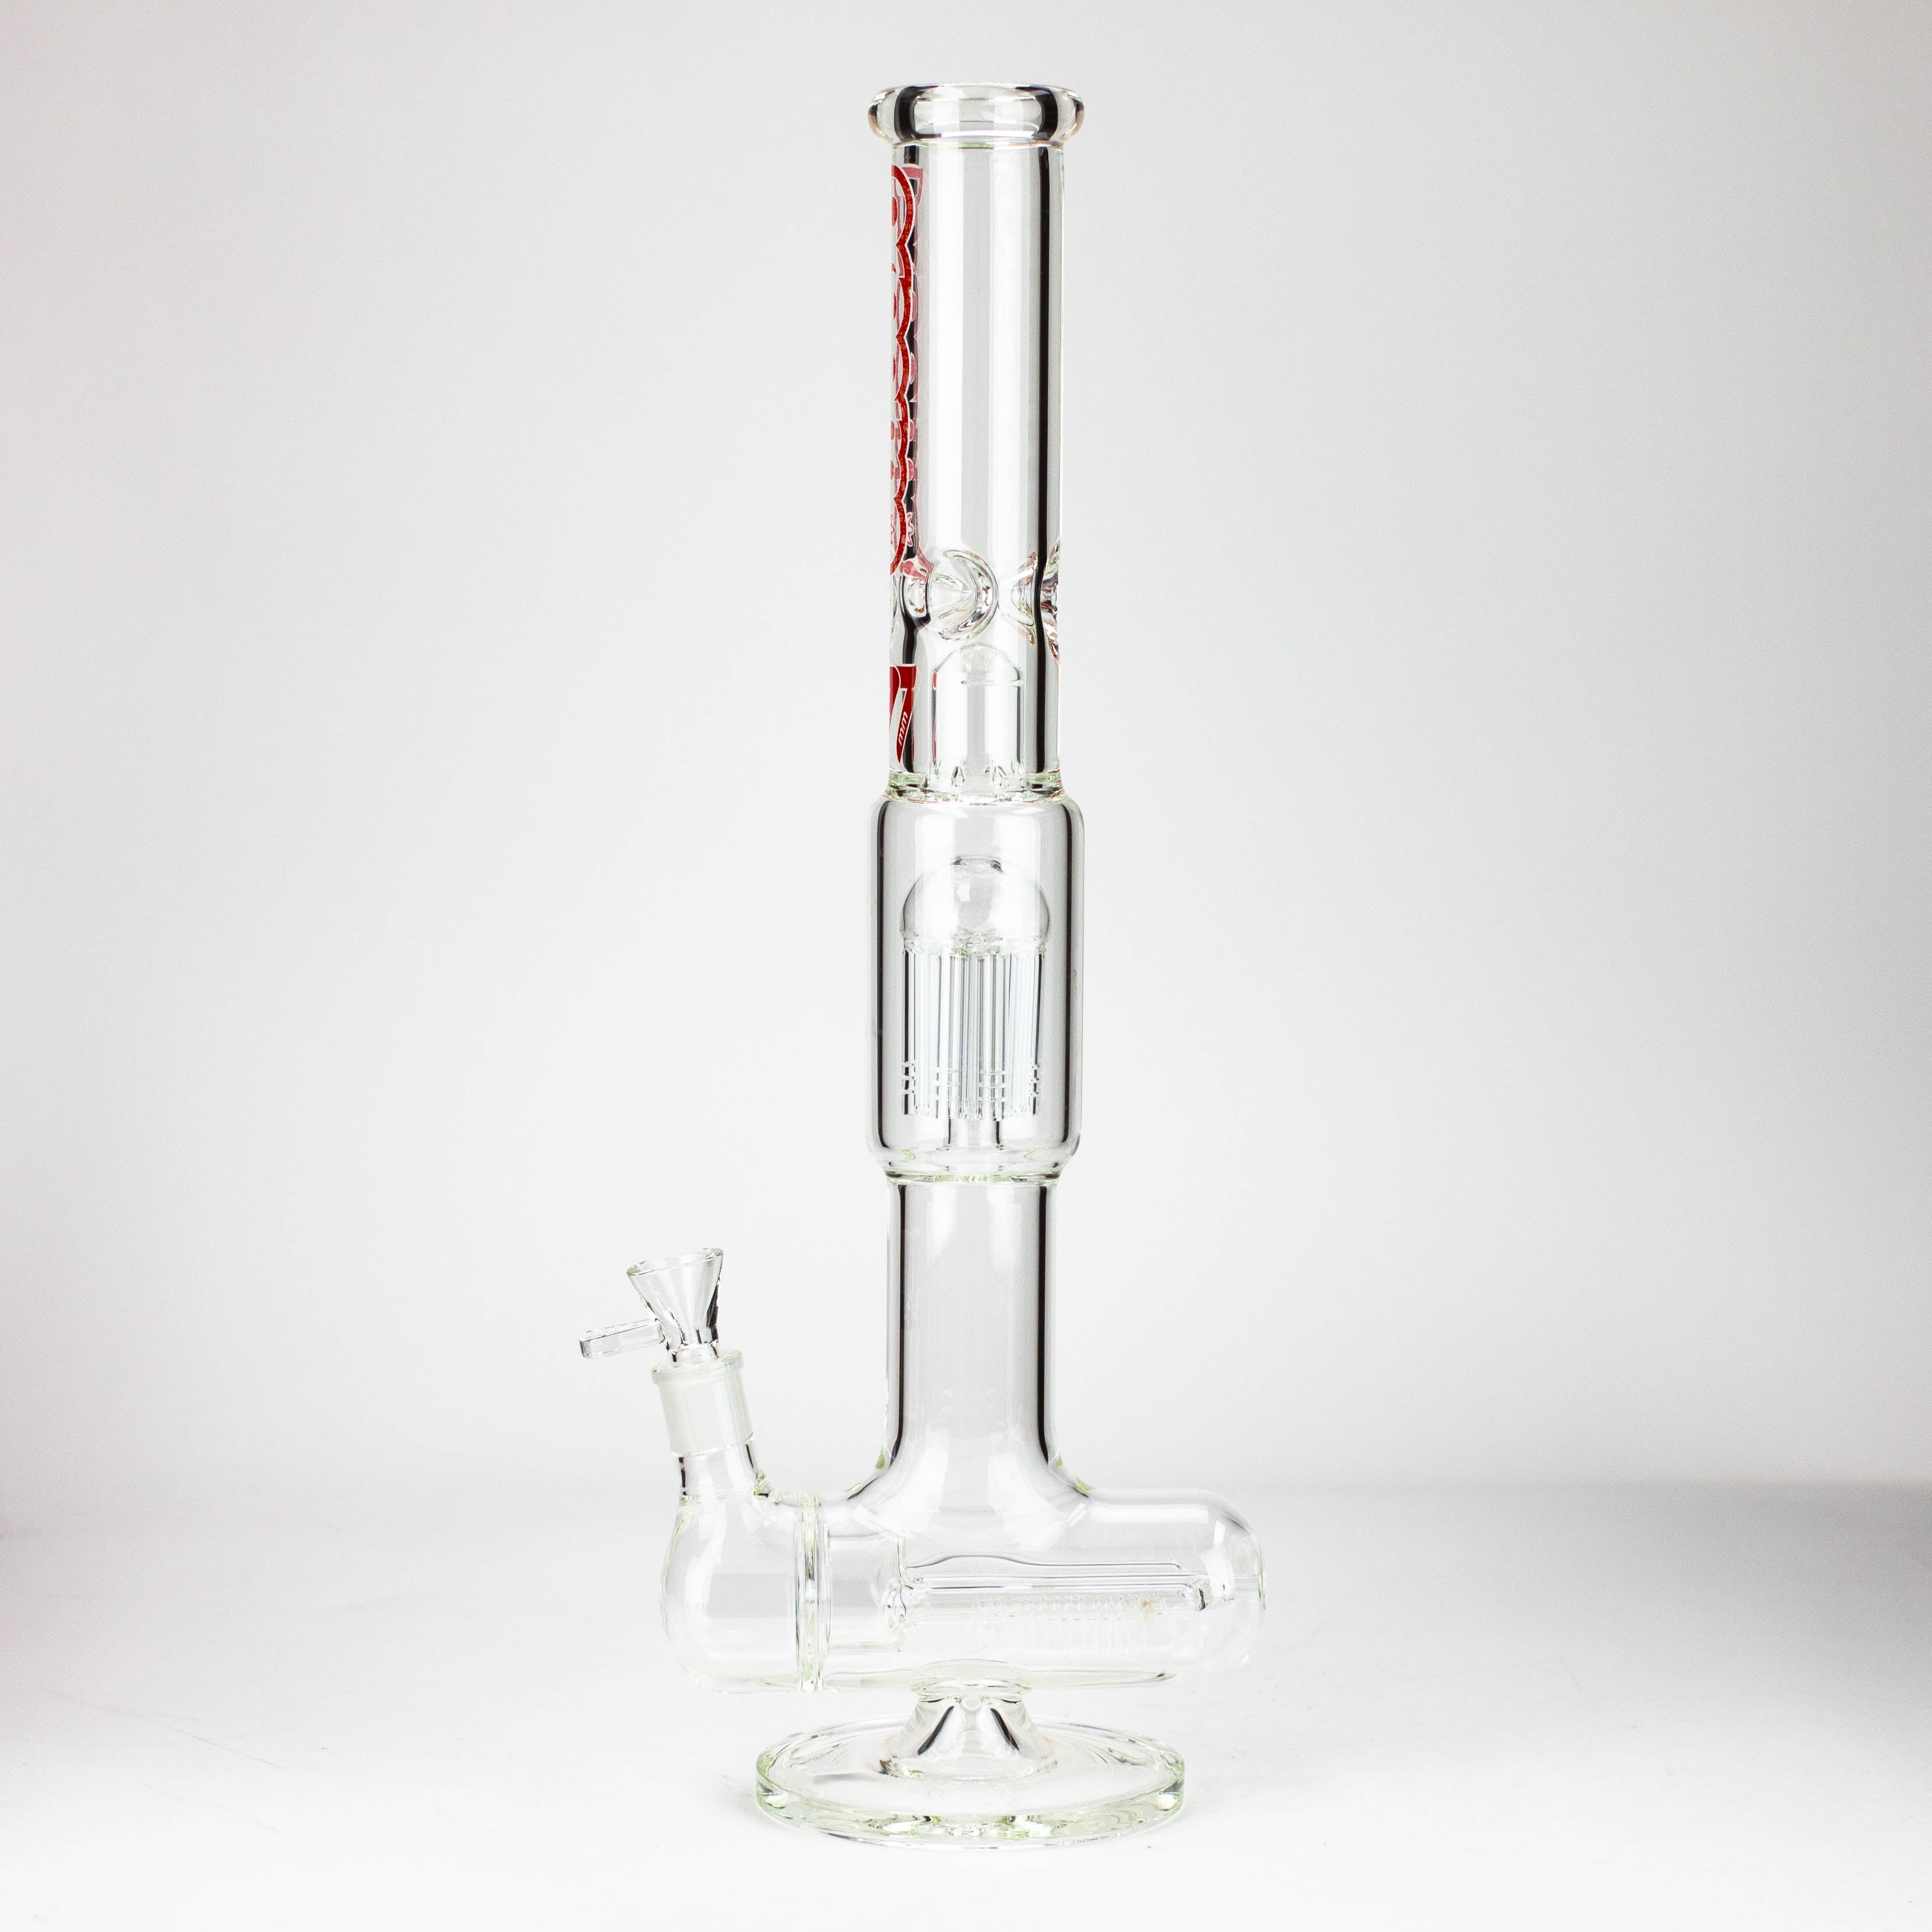 preemo - 20 inch Dome Over Triple Inline to Tree Perc_14